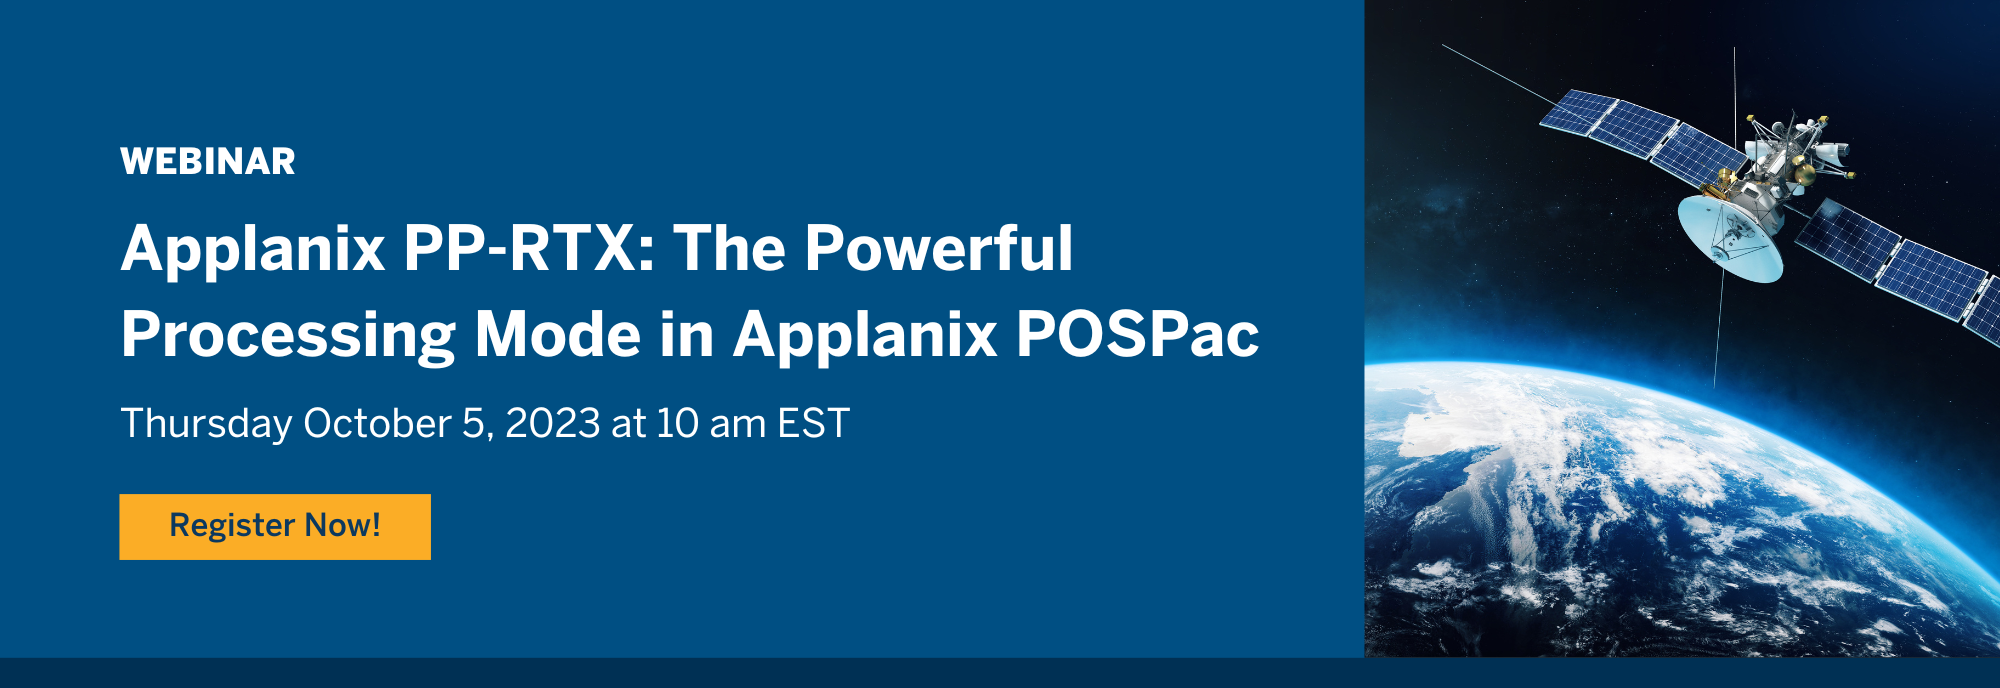 Register for our webinar on Applanix PP-RTX: The Powerful Processing Mode in Applanix POSPac! | Oct 5 @ 10 am EST